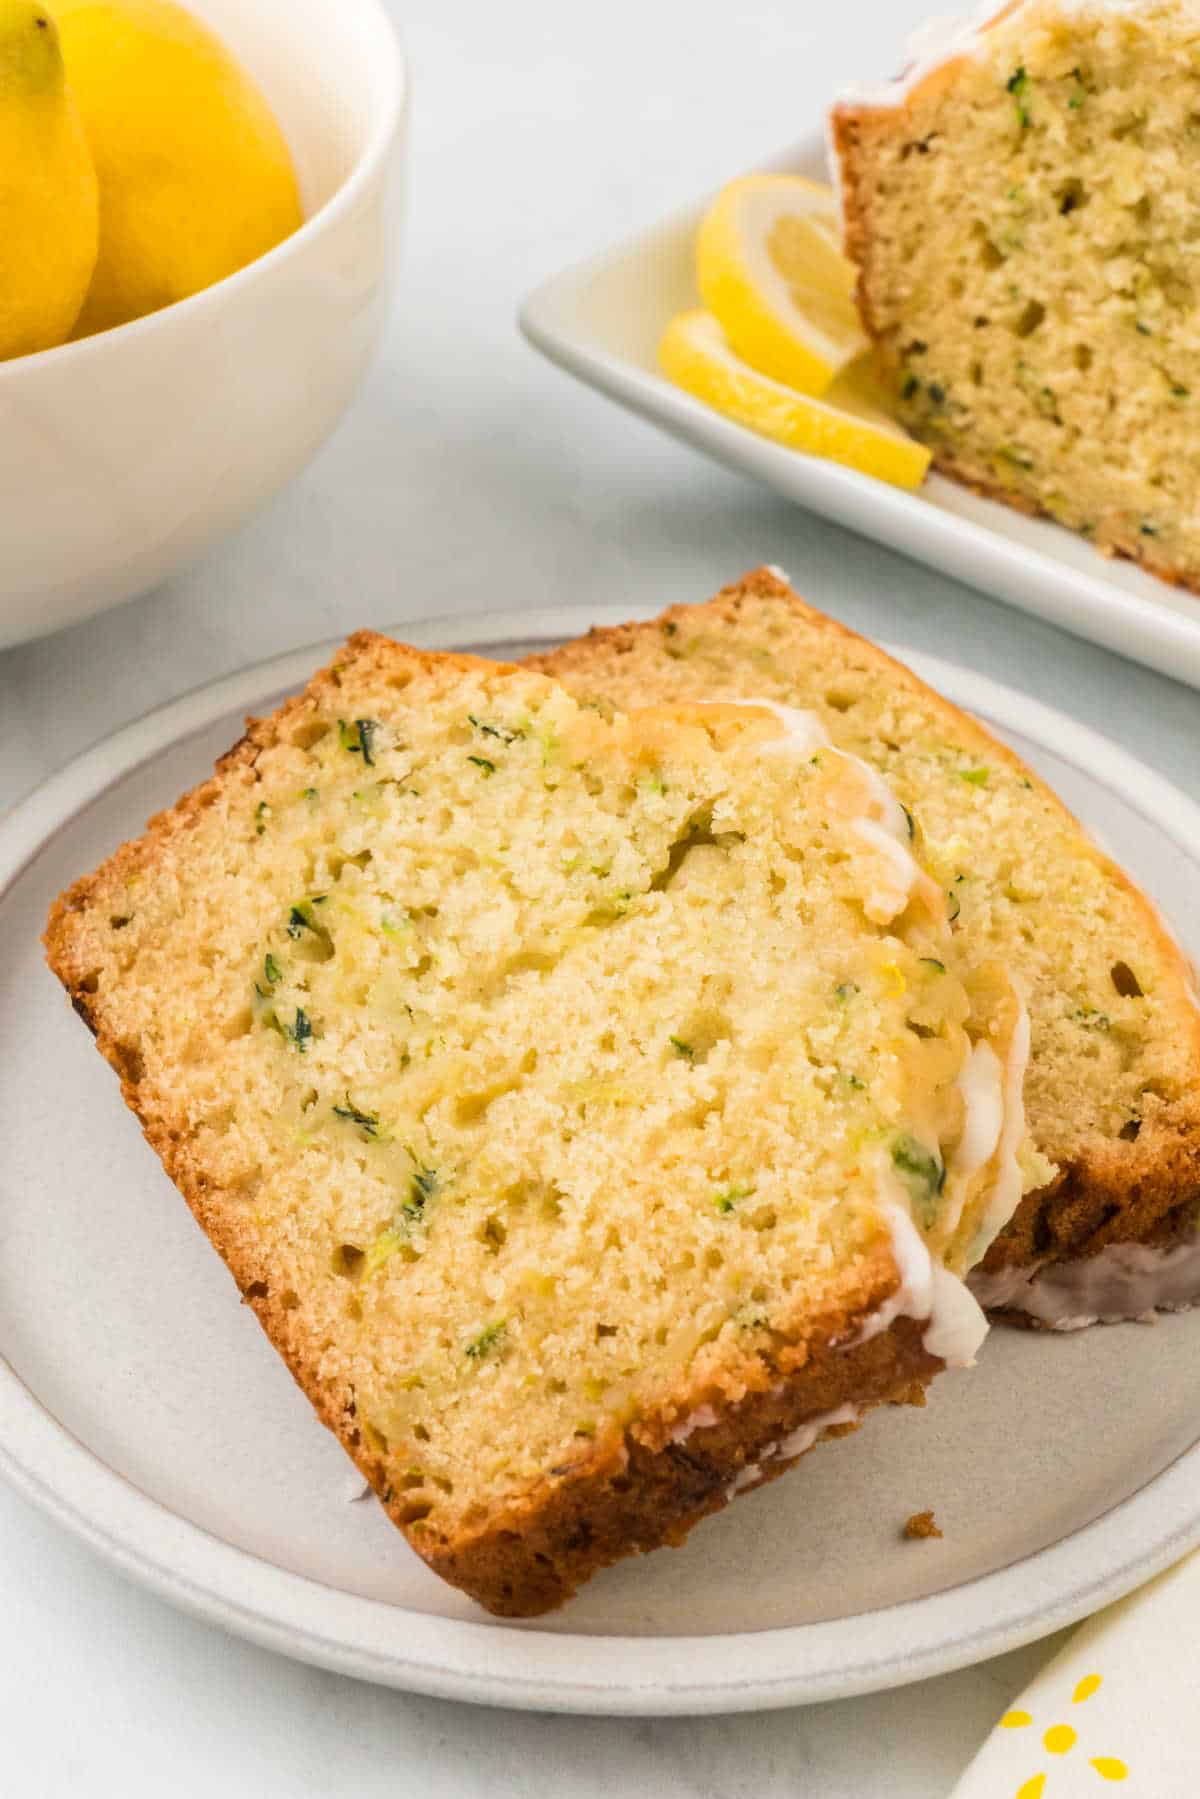 Slices of lemon zucchini bread on a plate.